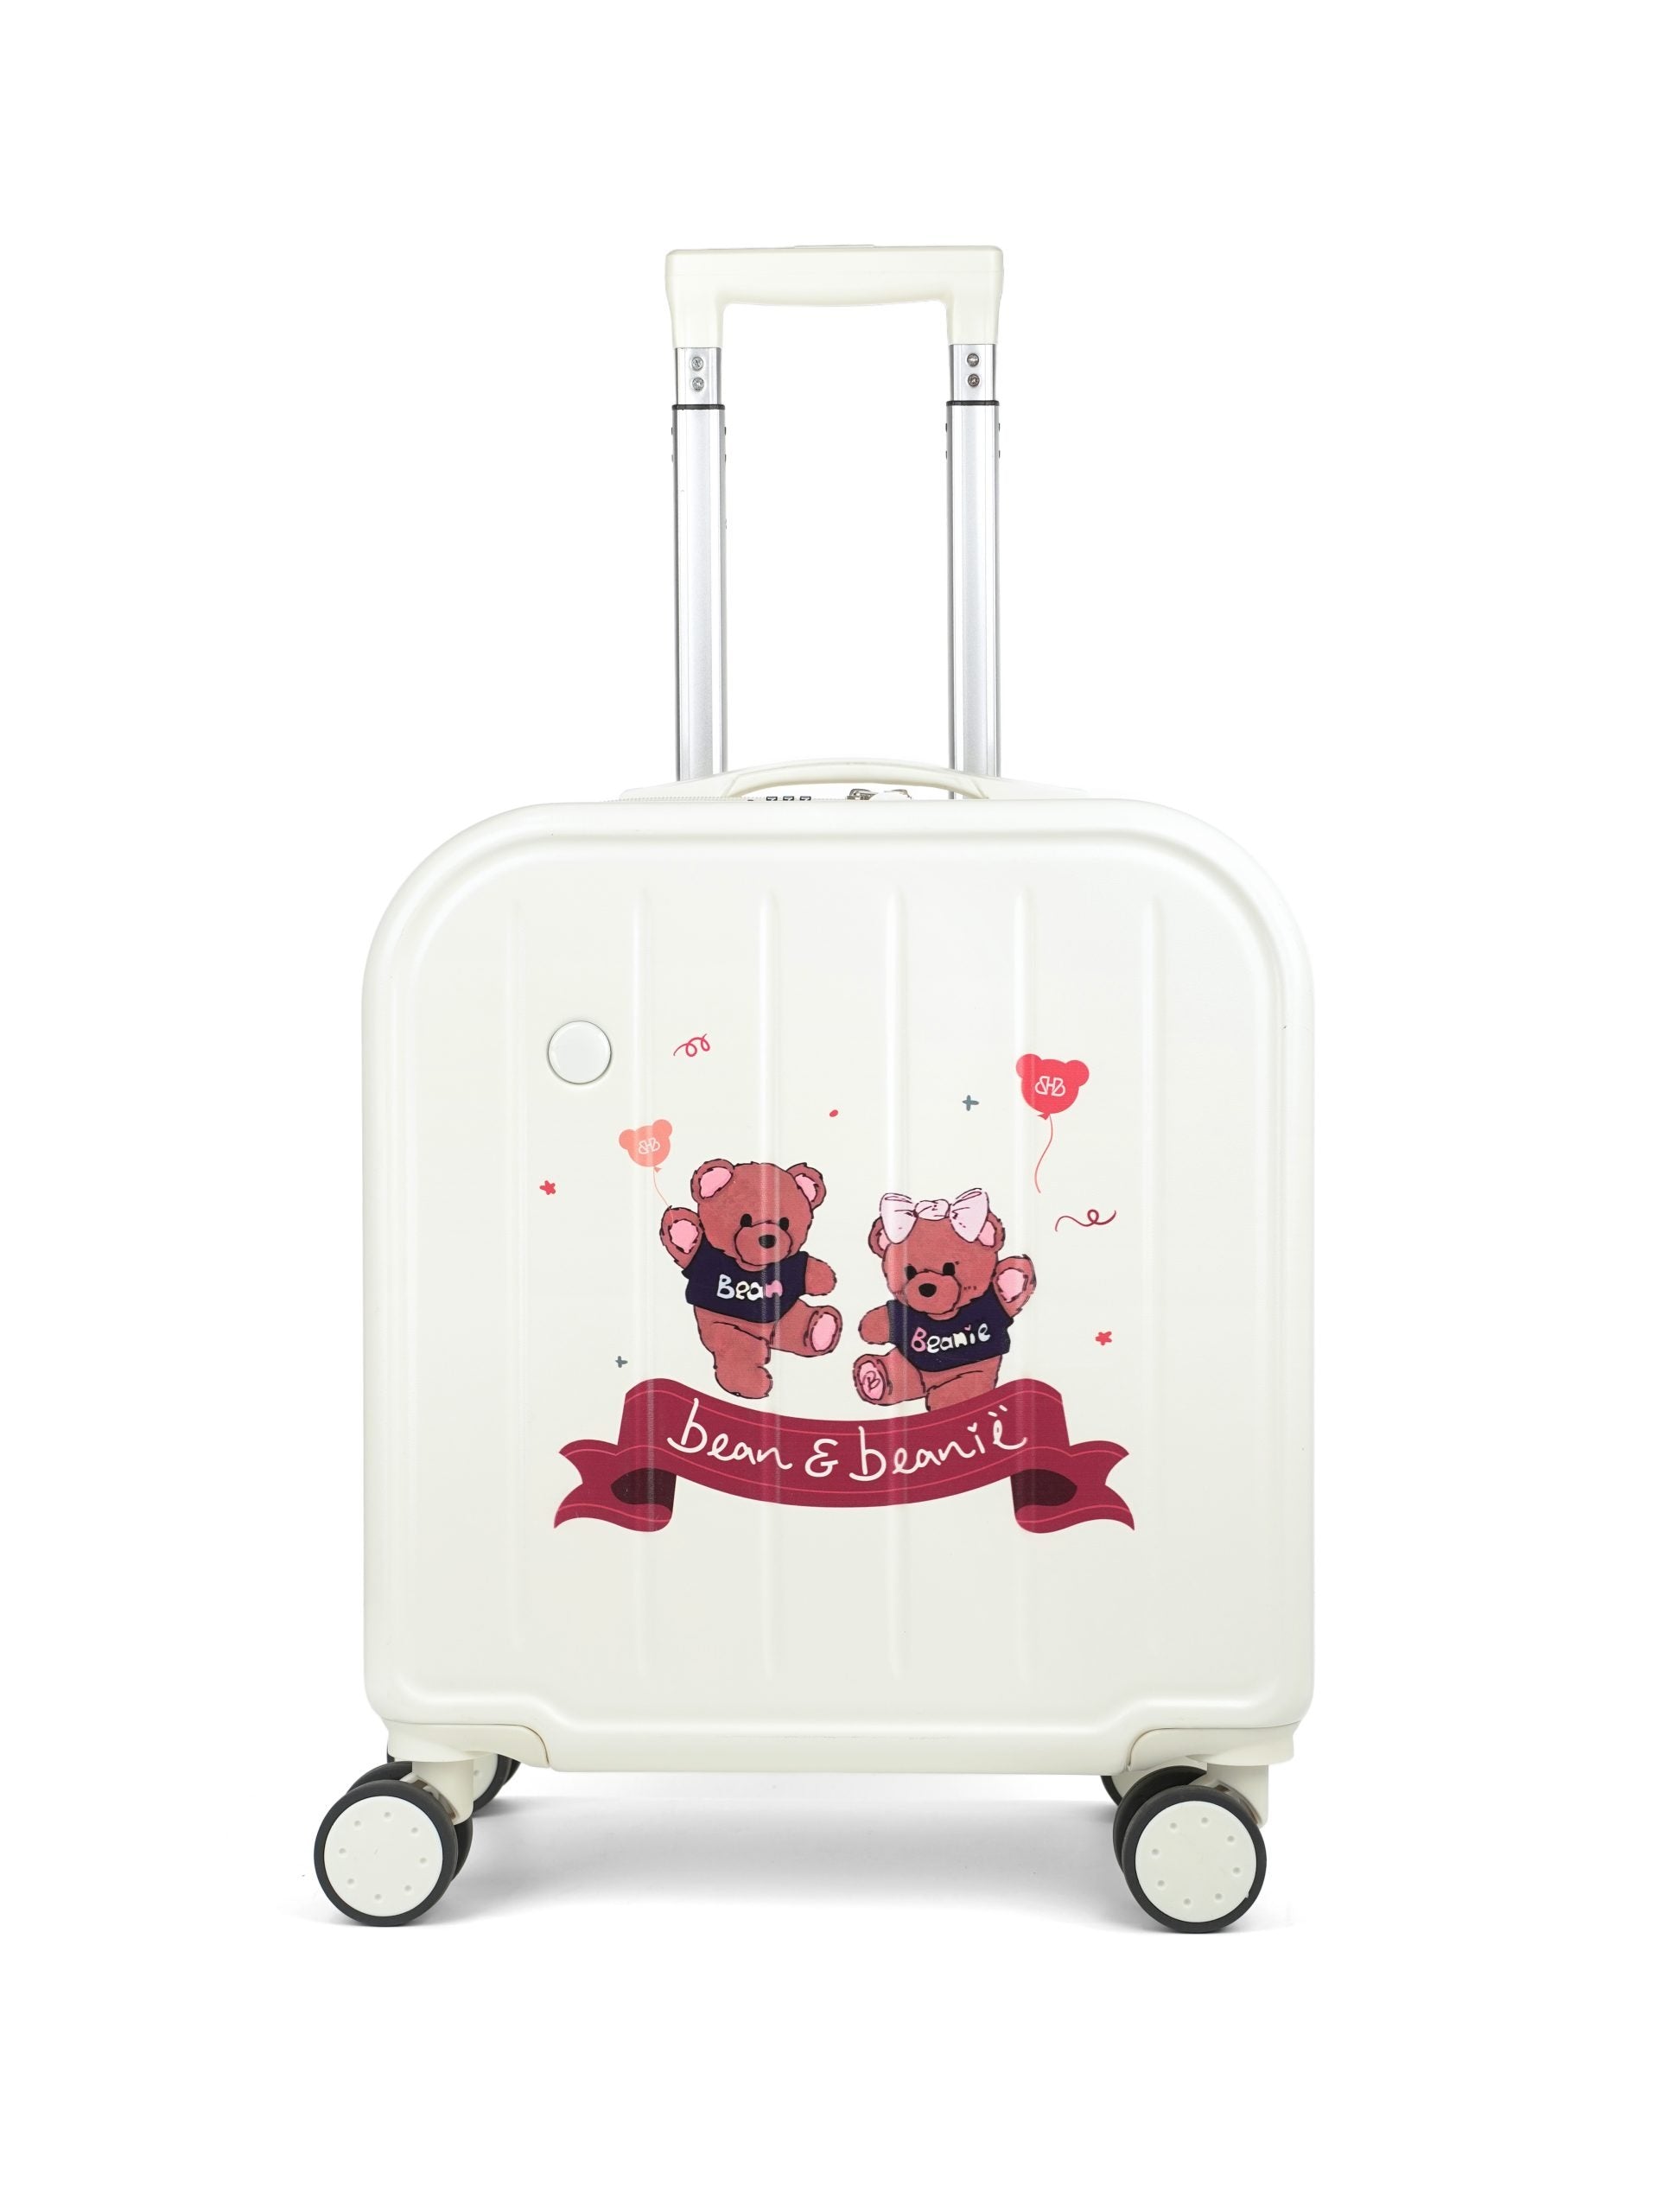 Bean and Beanië Luggage Set Collection